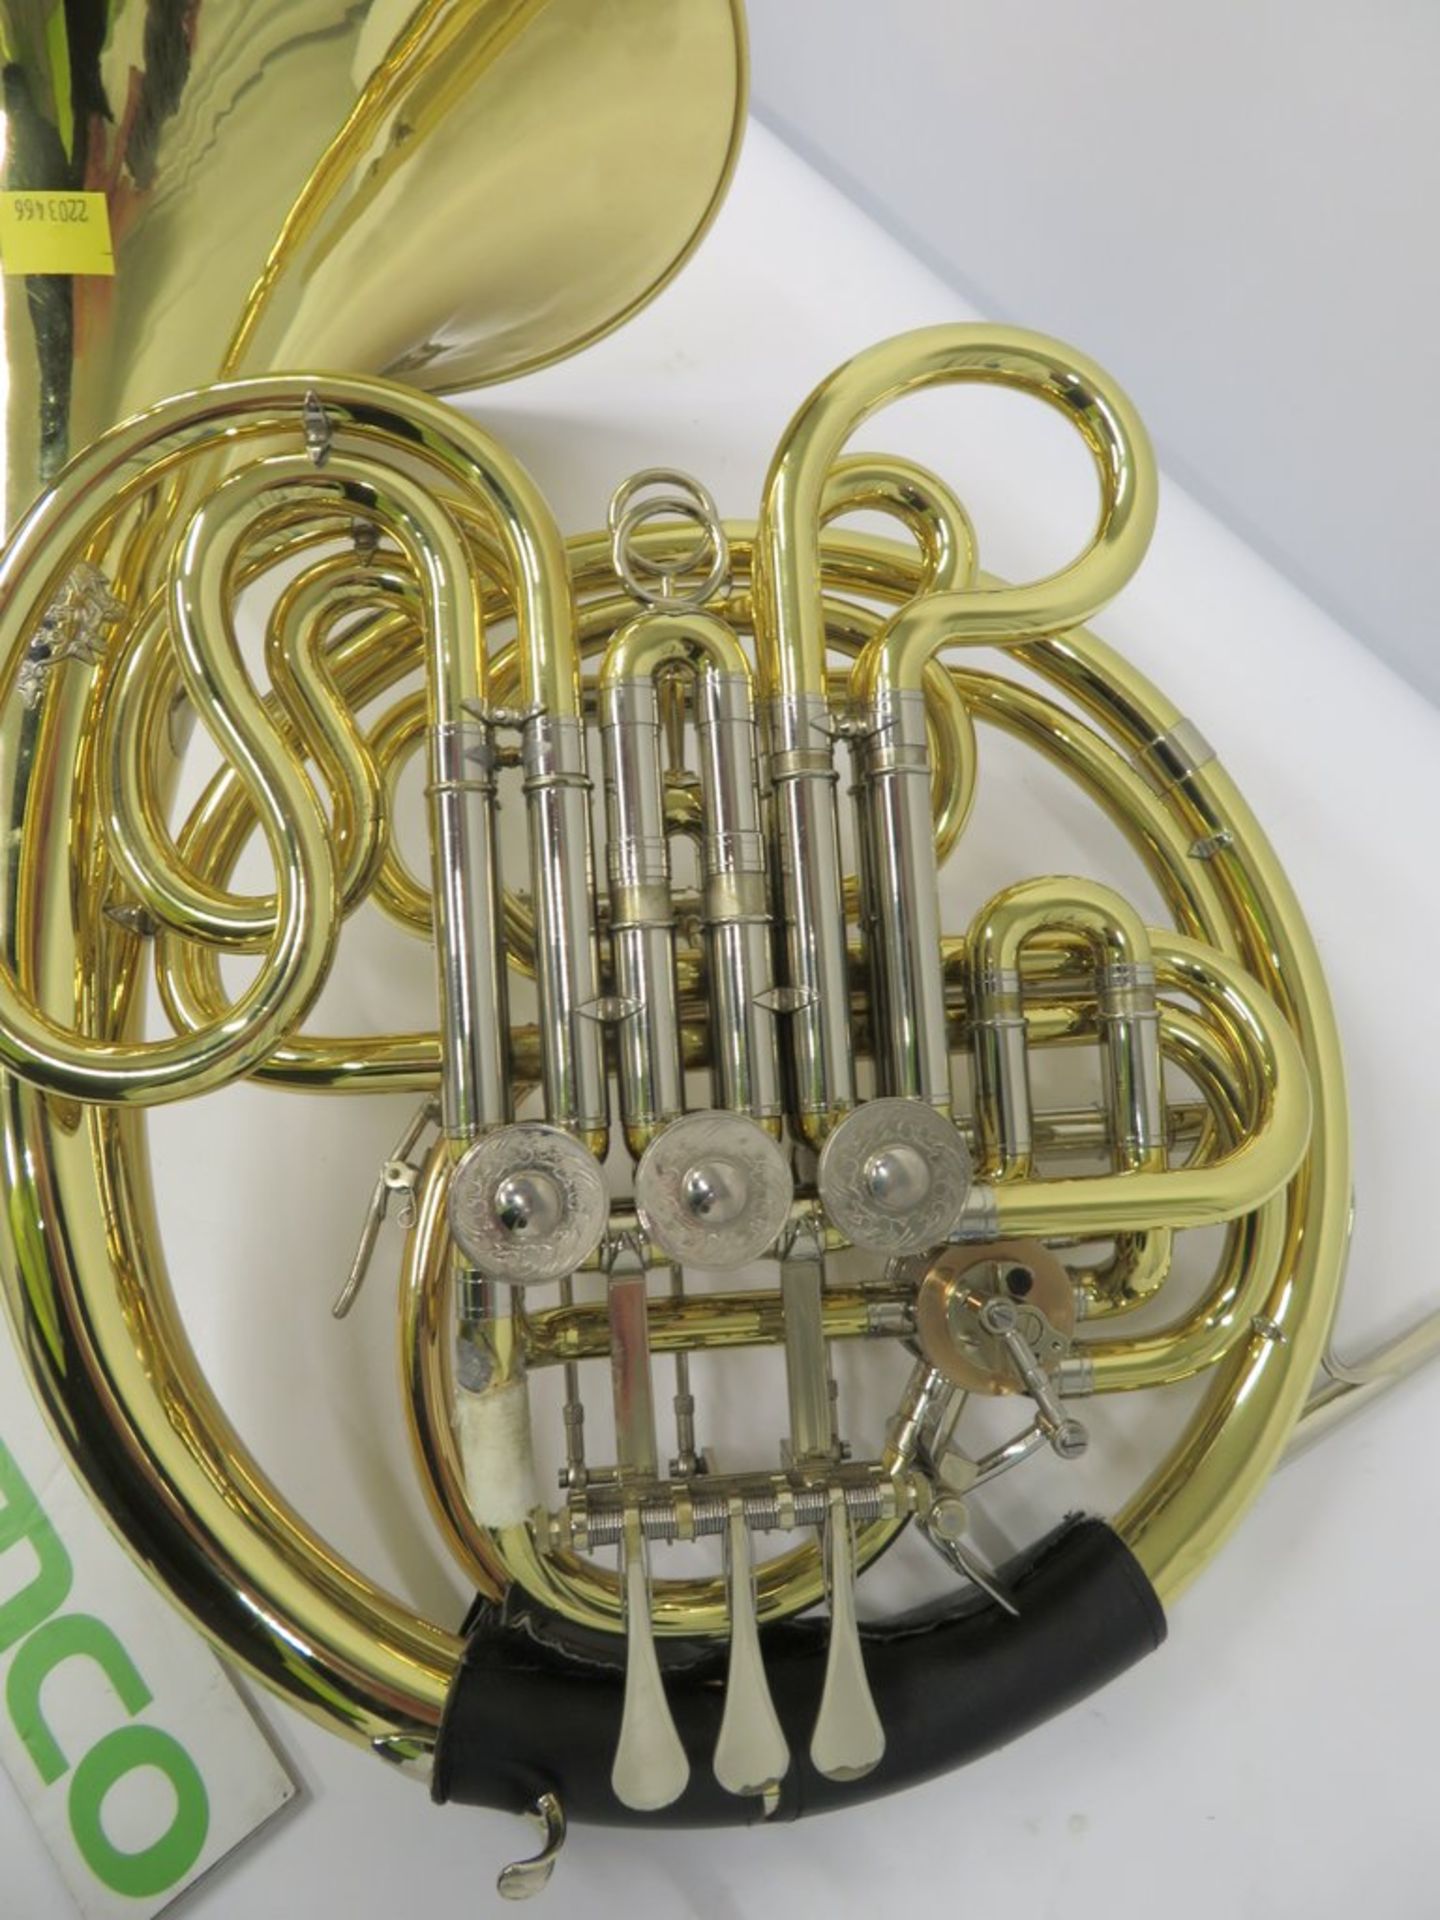 Gebr-Alexander Mainz 103 French Horn Complete With Case. - Image 4 of 15